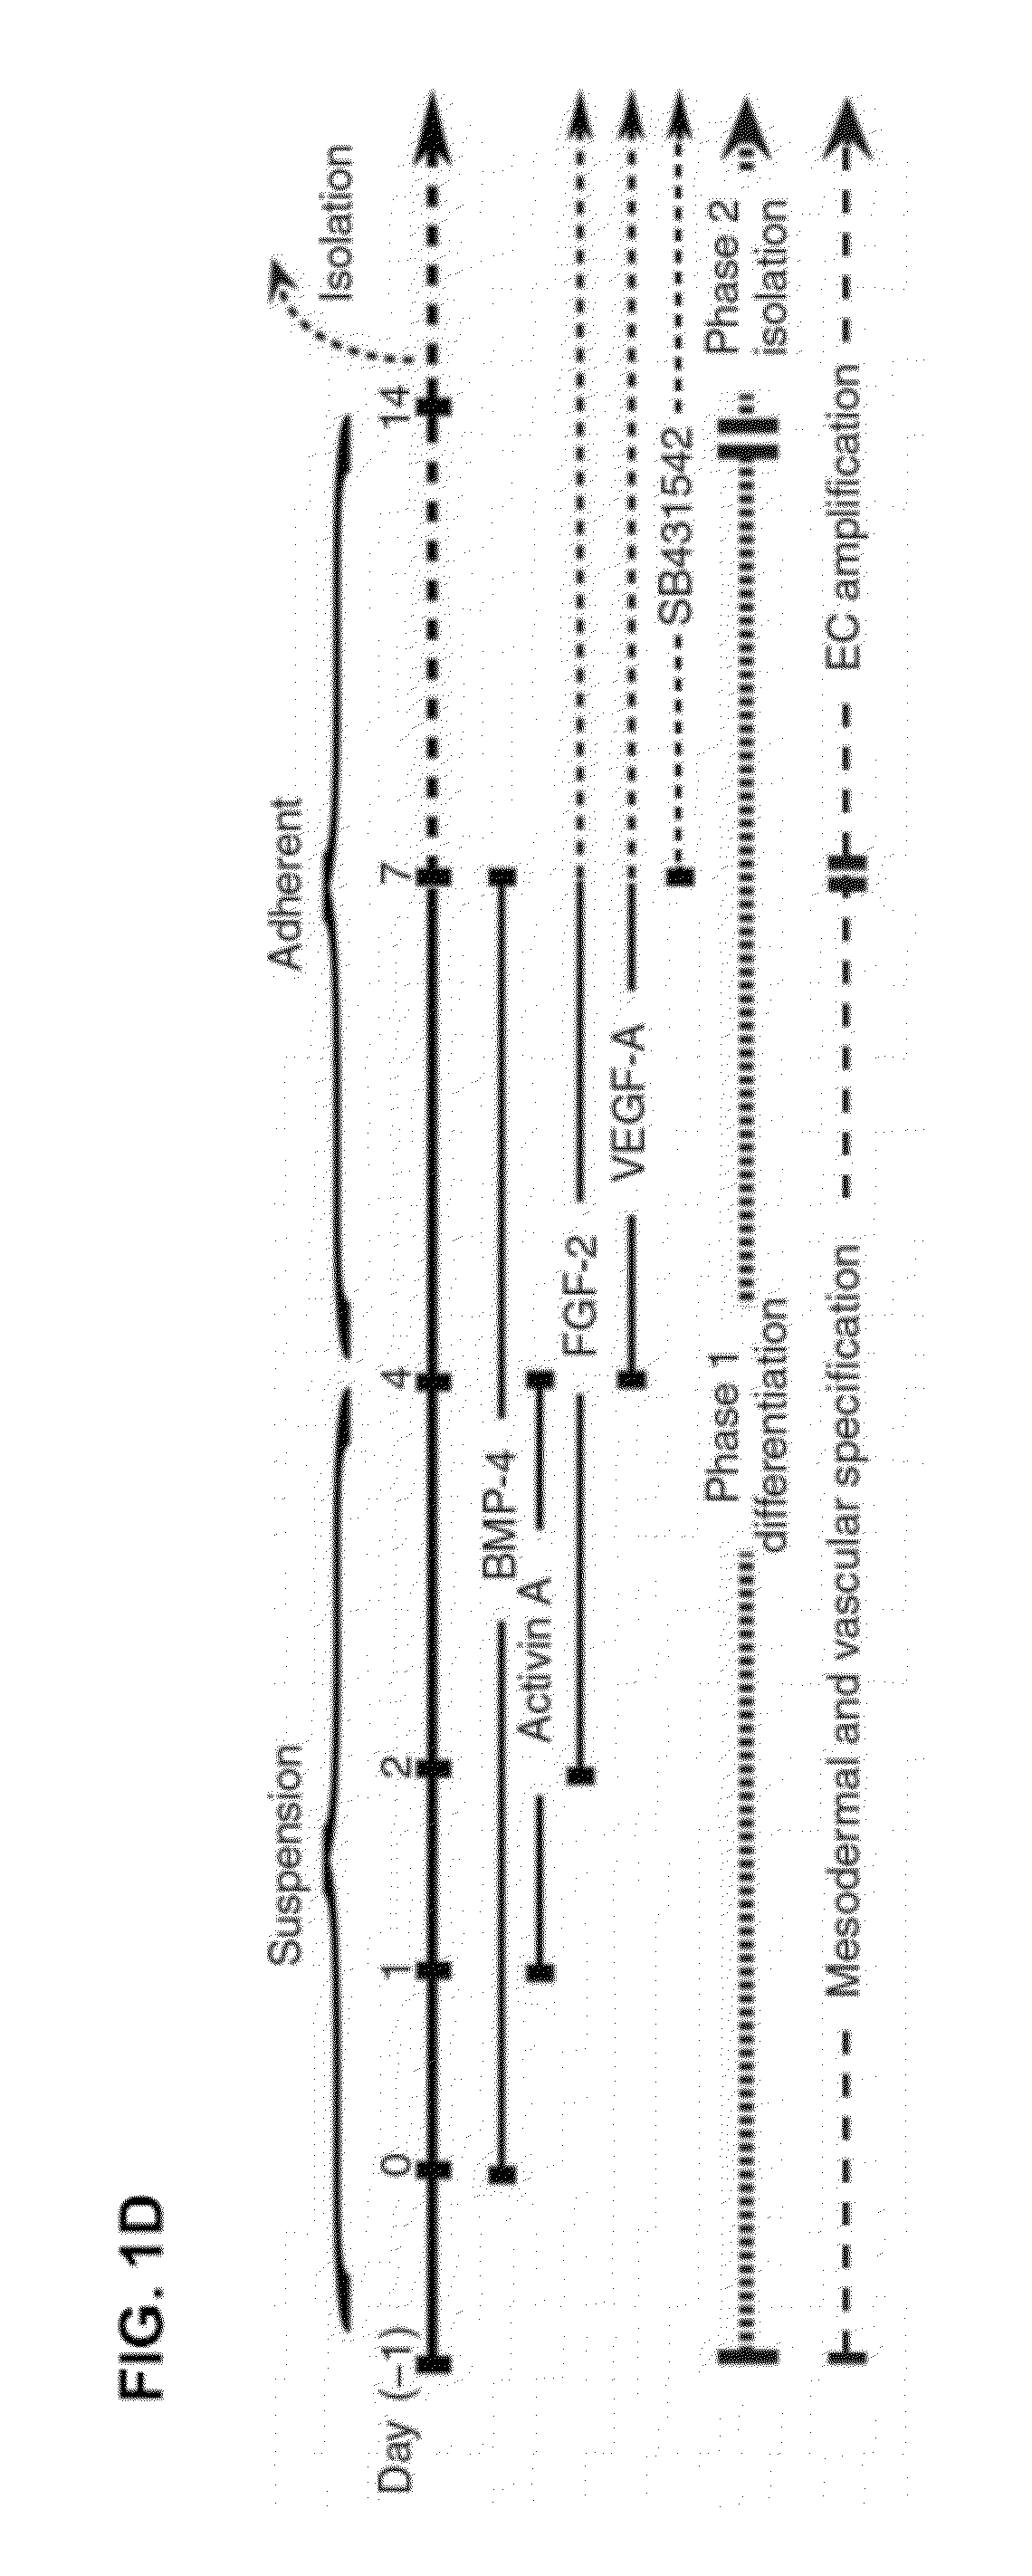 Methods for developing endothelial cells from pluripotent cells and endothelial cells derived